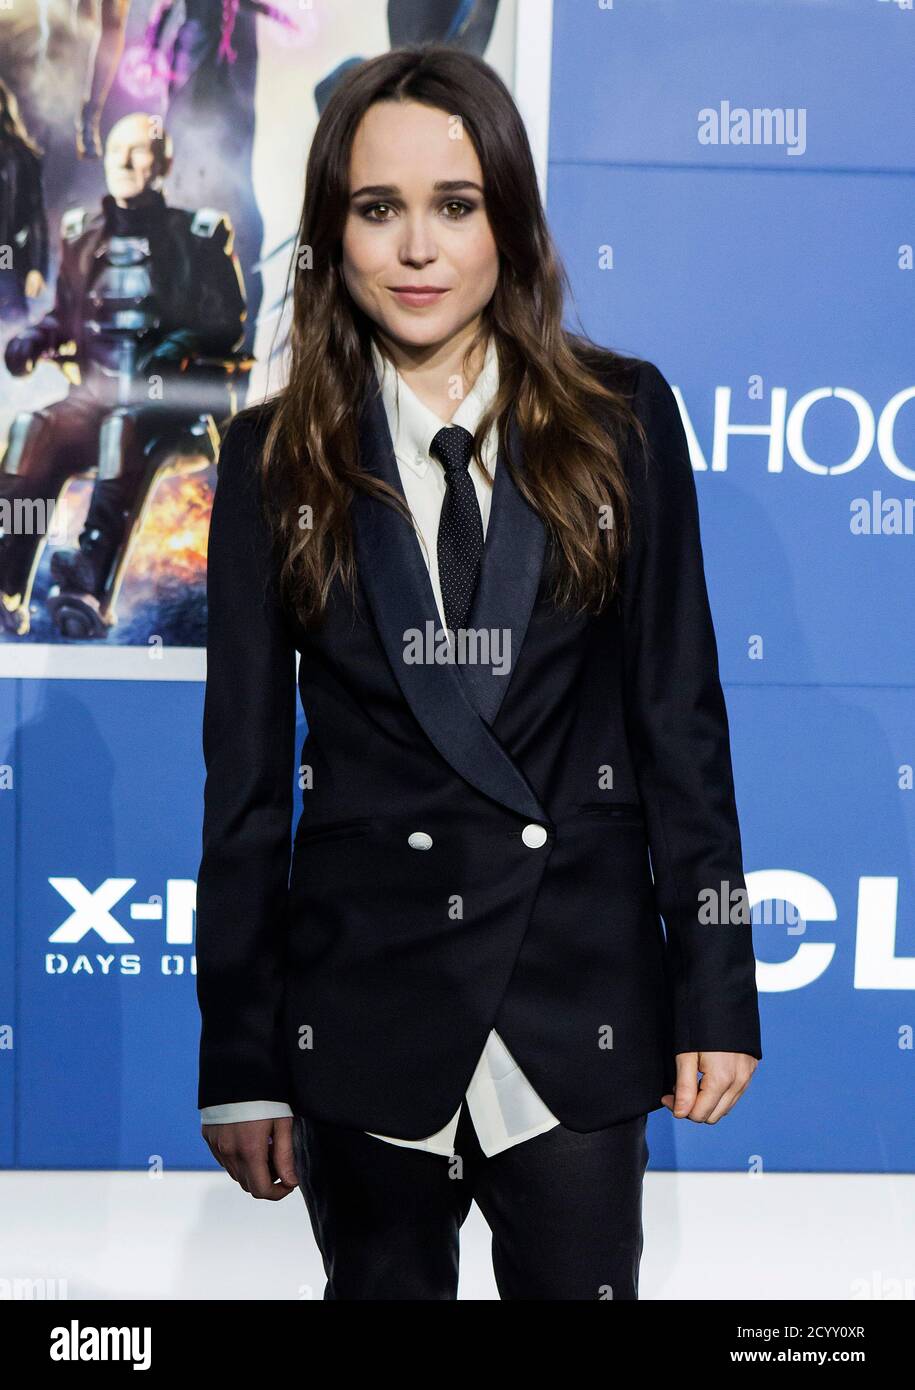 Actress Ellen Page attends the 